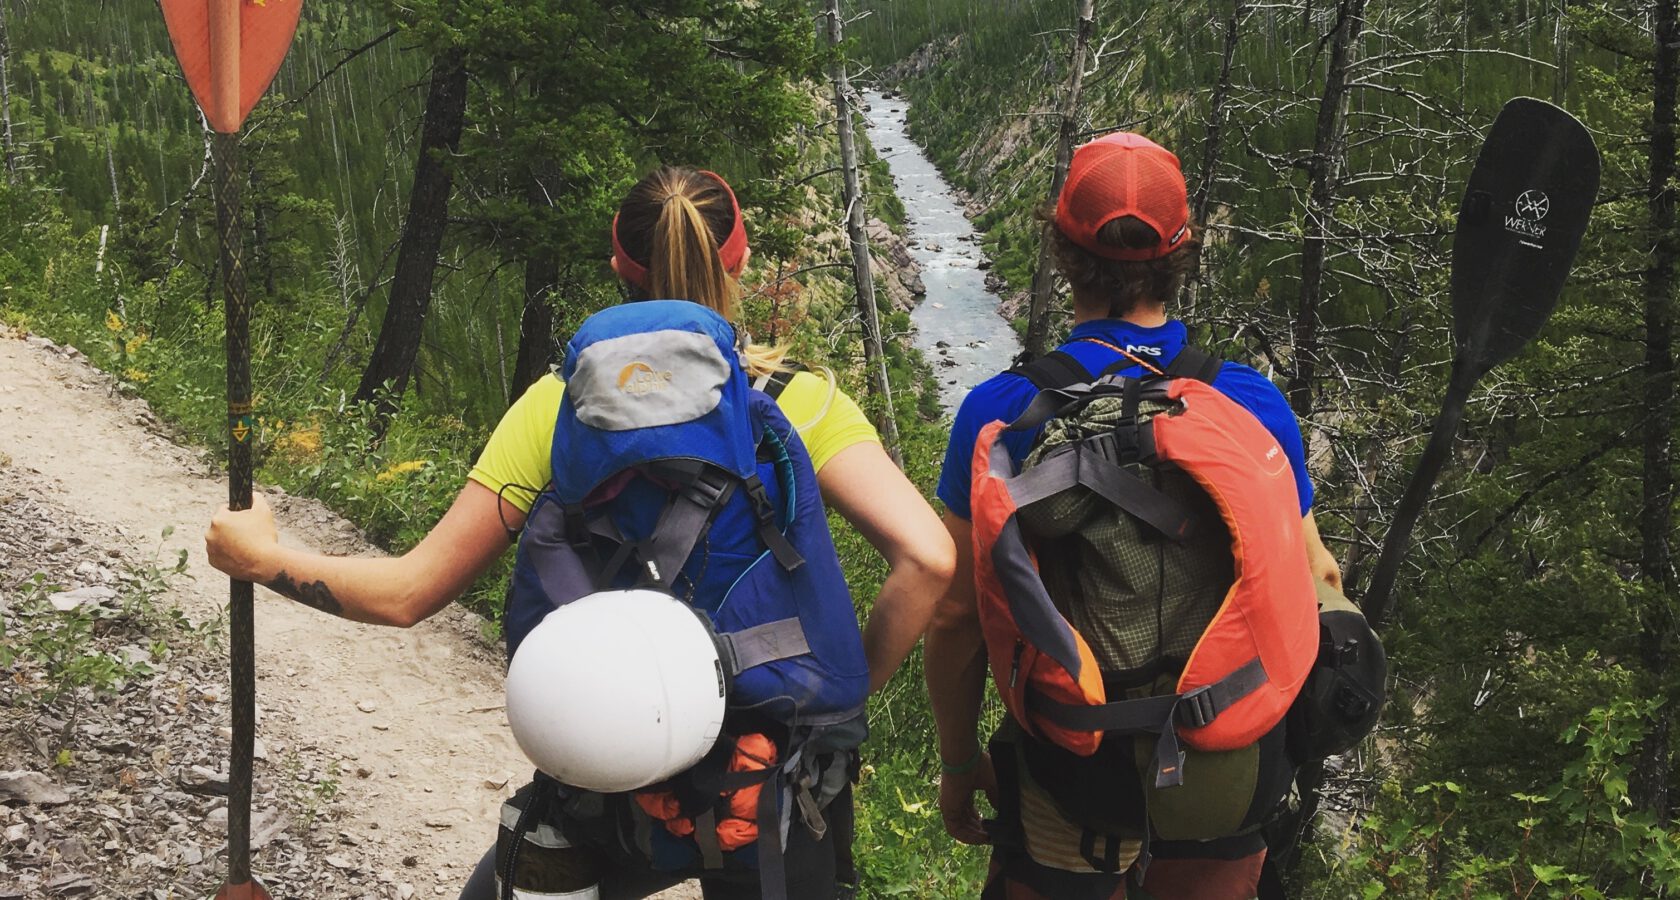 Adventure Inspiration: 15 Instagram Accounts to Follow if You Love Rivers